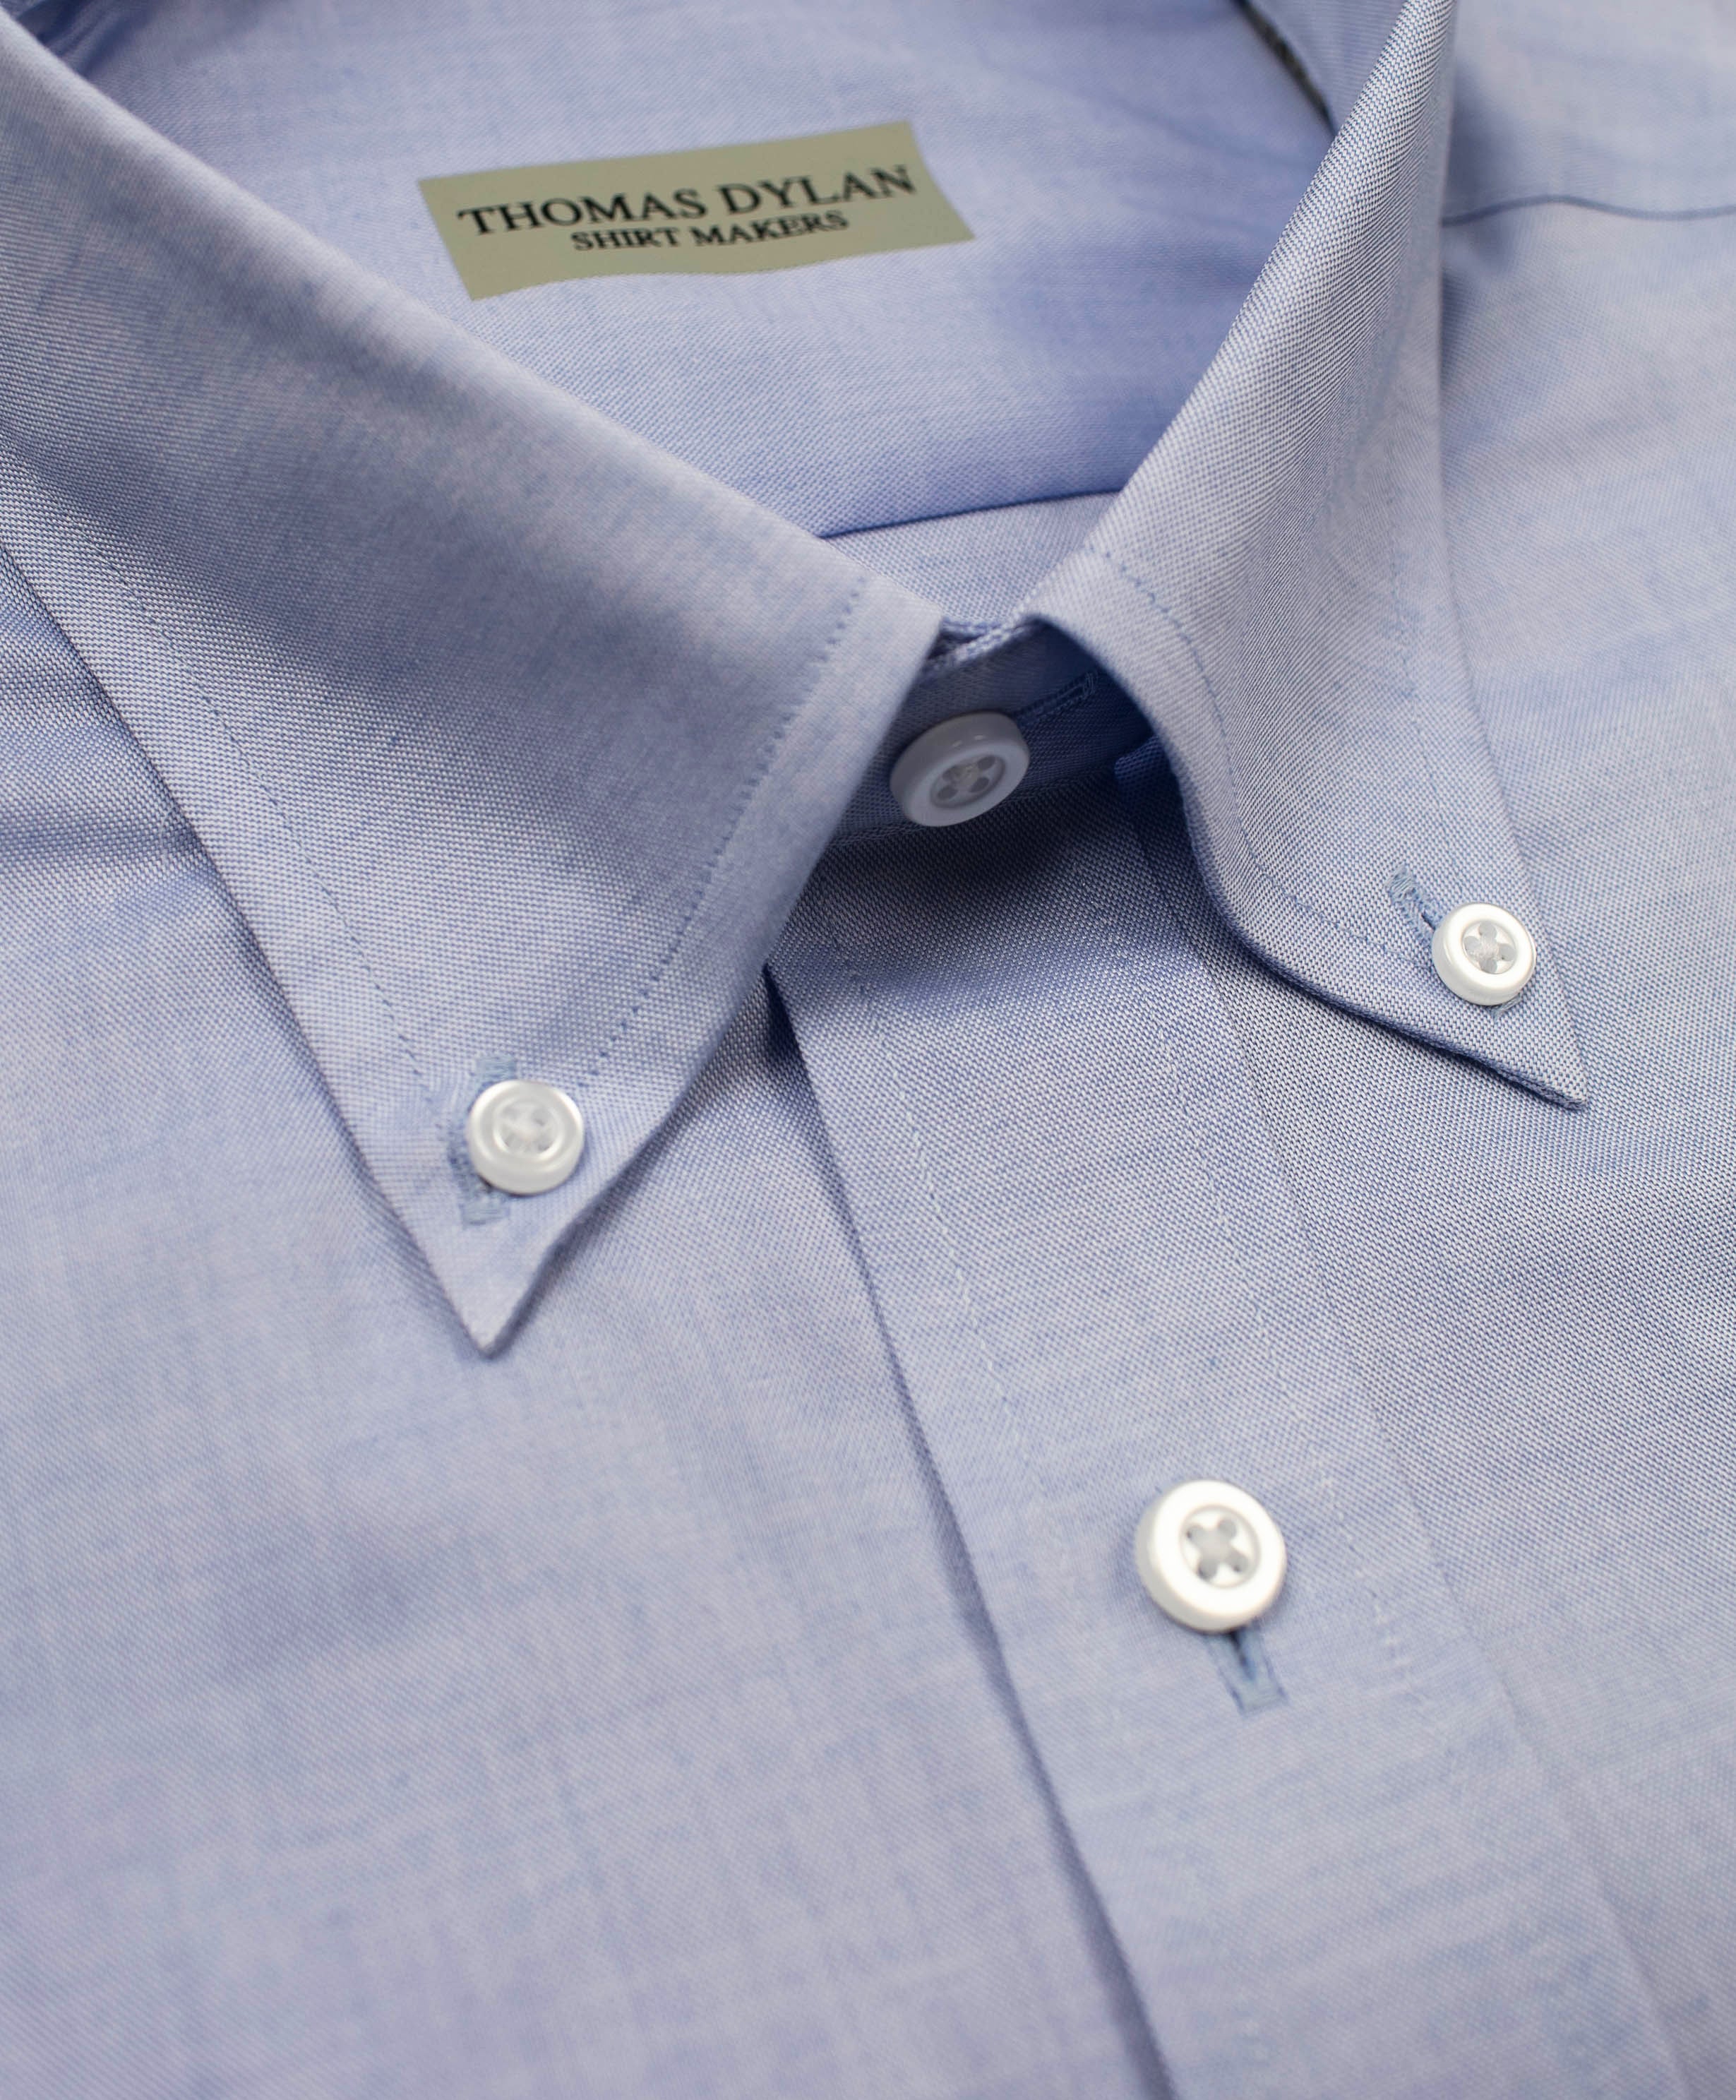 121 TF BD - Thomas Dylan Blue Tailored Fit Button Down Collar